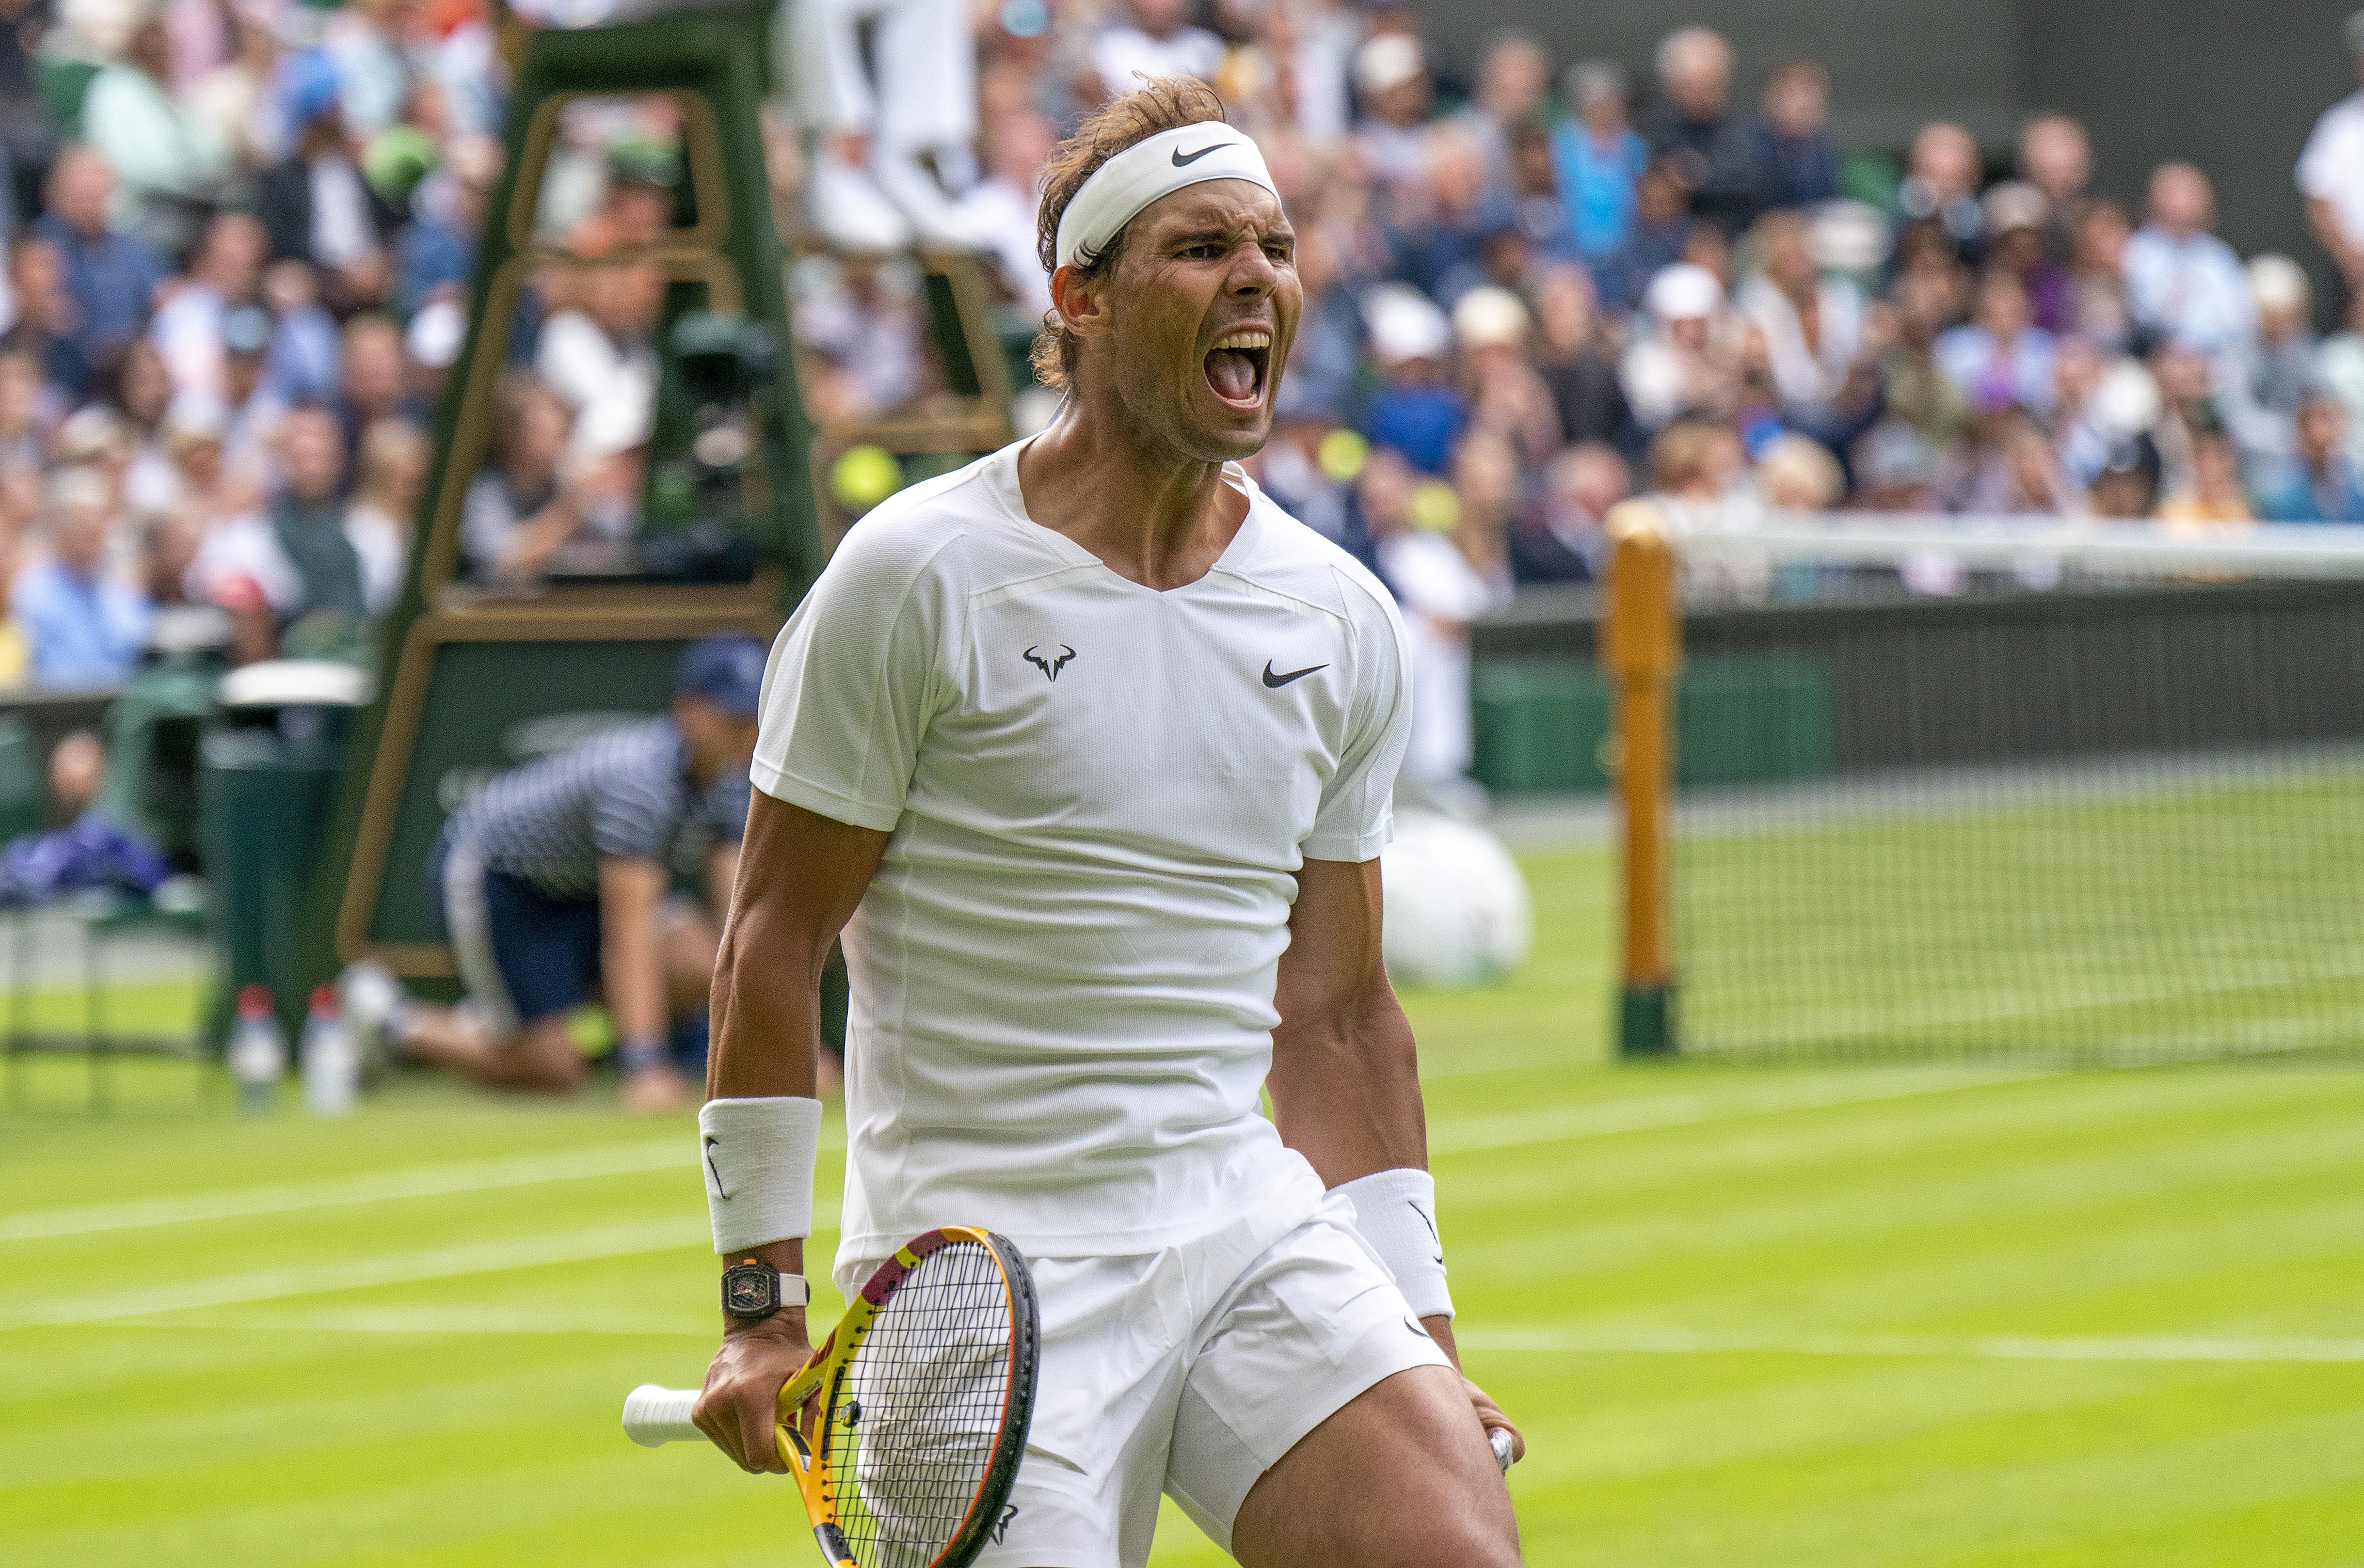 Ricardas Berankis vs Rafael Nadal Odds, Prediction and Betting Trends for 2022 Wimbledon Men's Round 2 Match